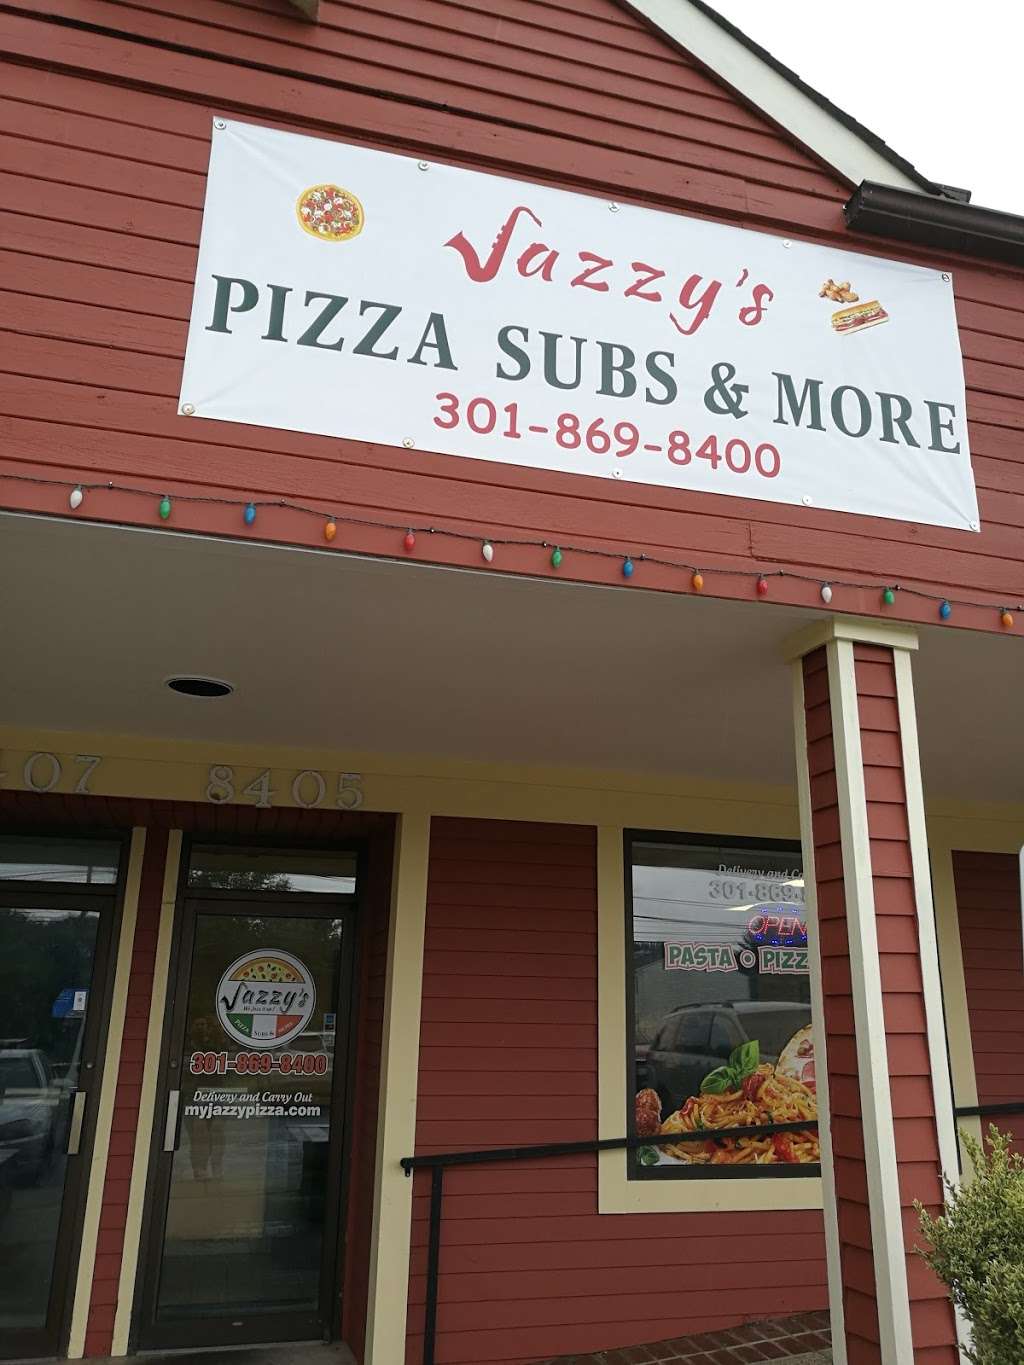 Jazzys Pizza, Subs & More | 8405 Snouffer School Rd, Gaithersburg, MD 20879, USA | Phone: (301) 869-8400